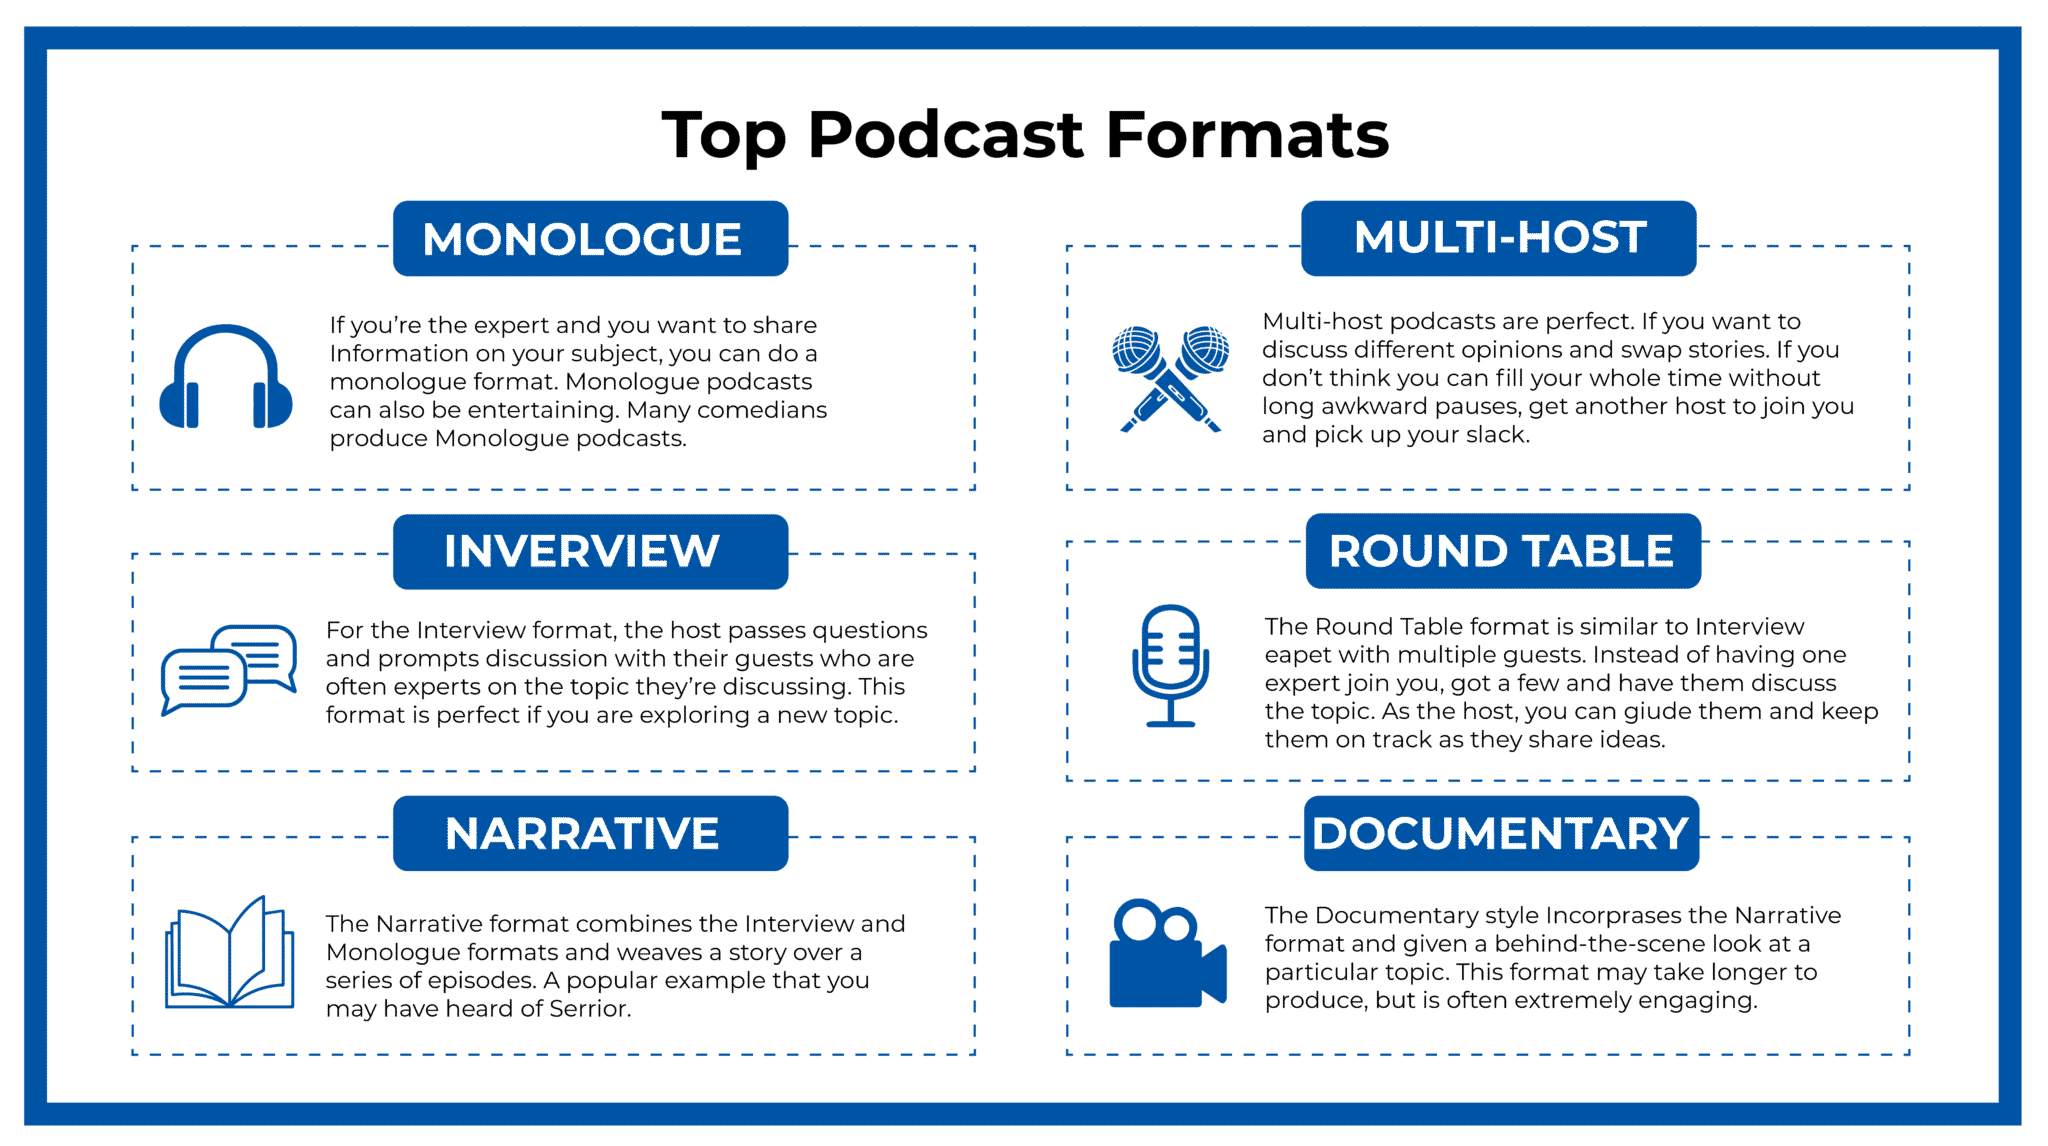 TOP PODCAST FORMATS